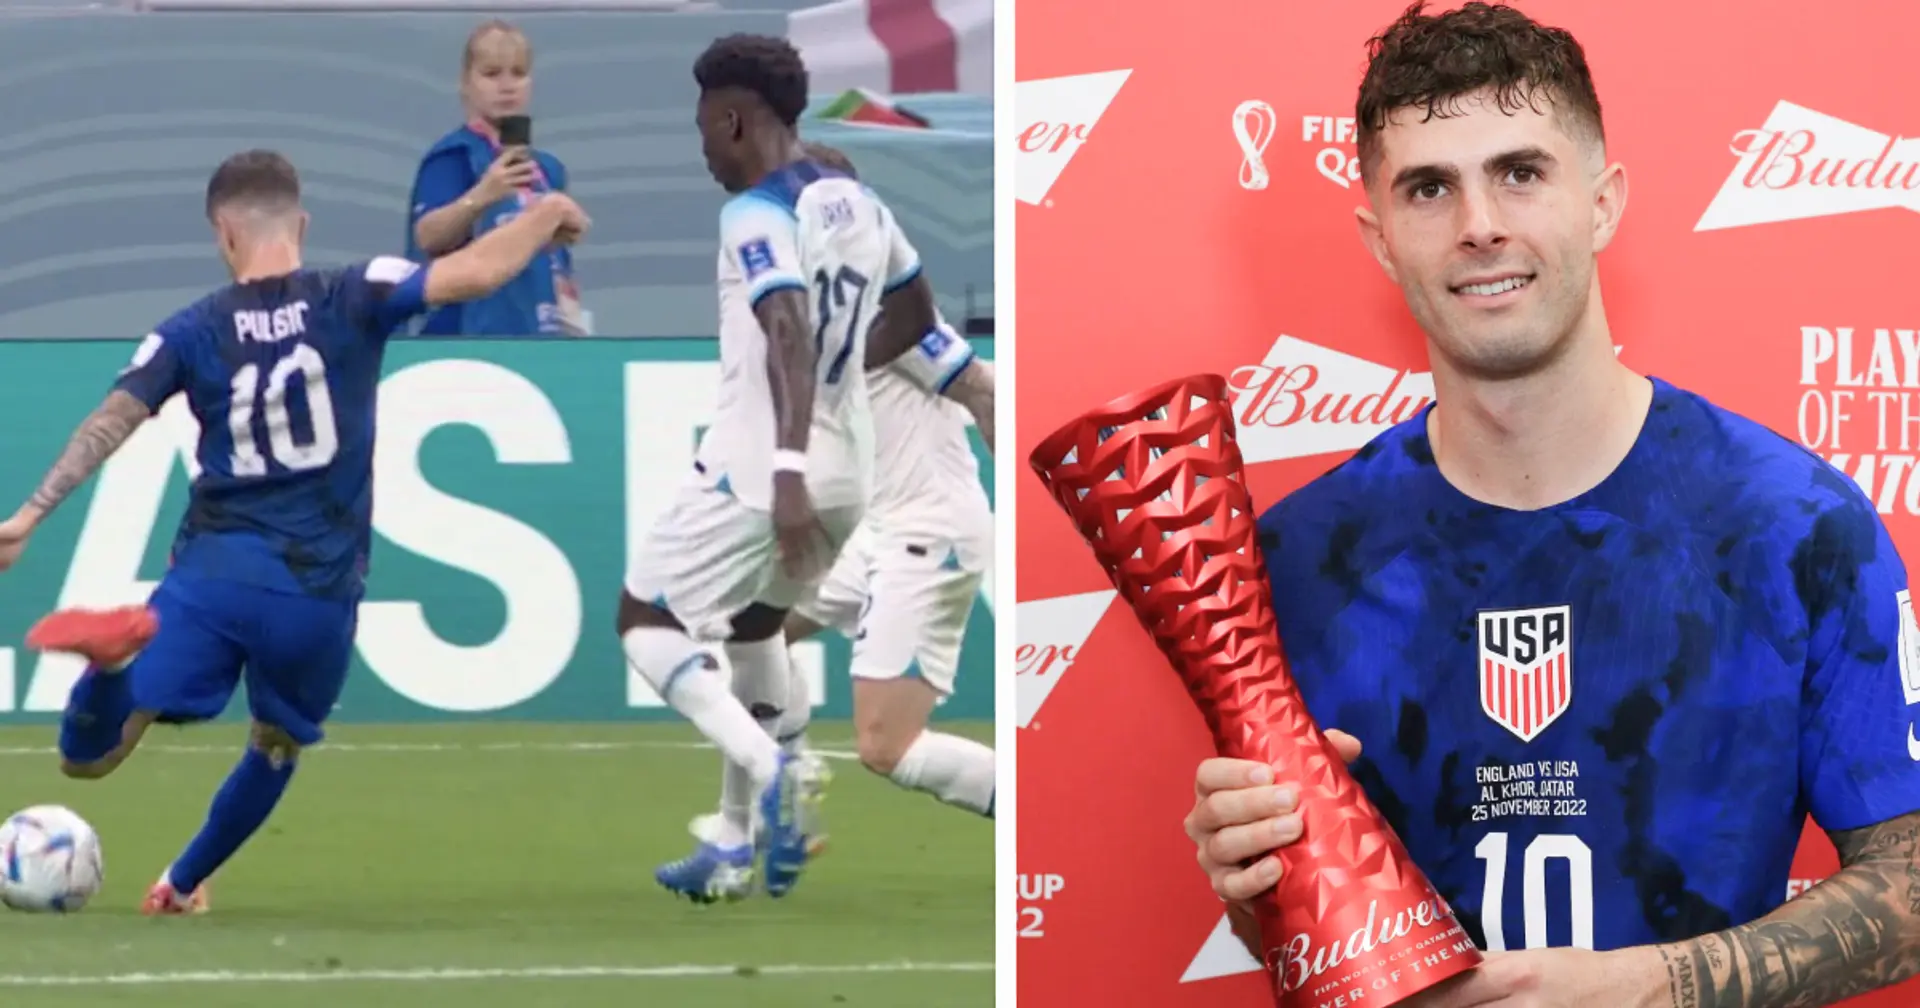 Christian Pulisic runs the show against England at World Cup and 2 more under-radar stories